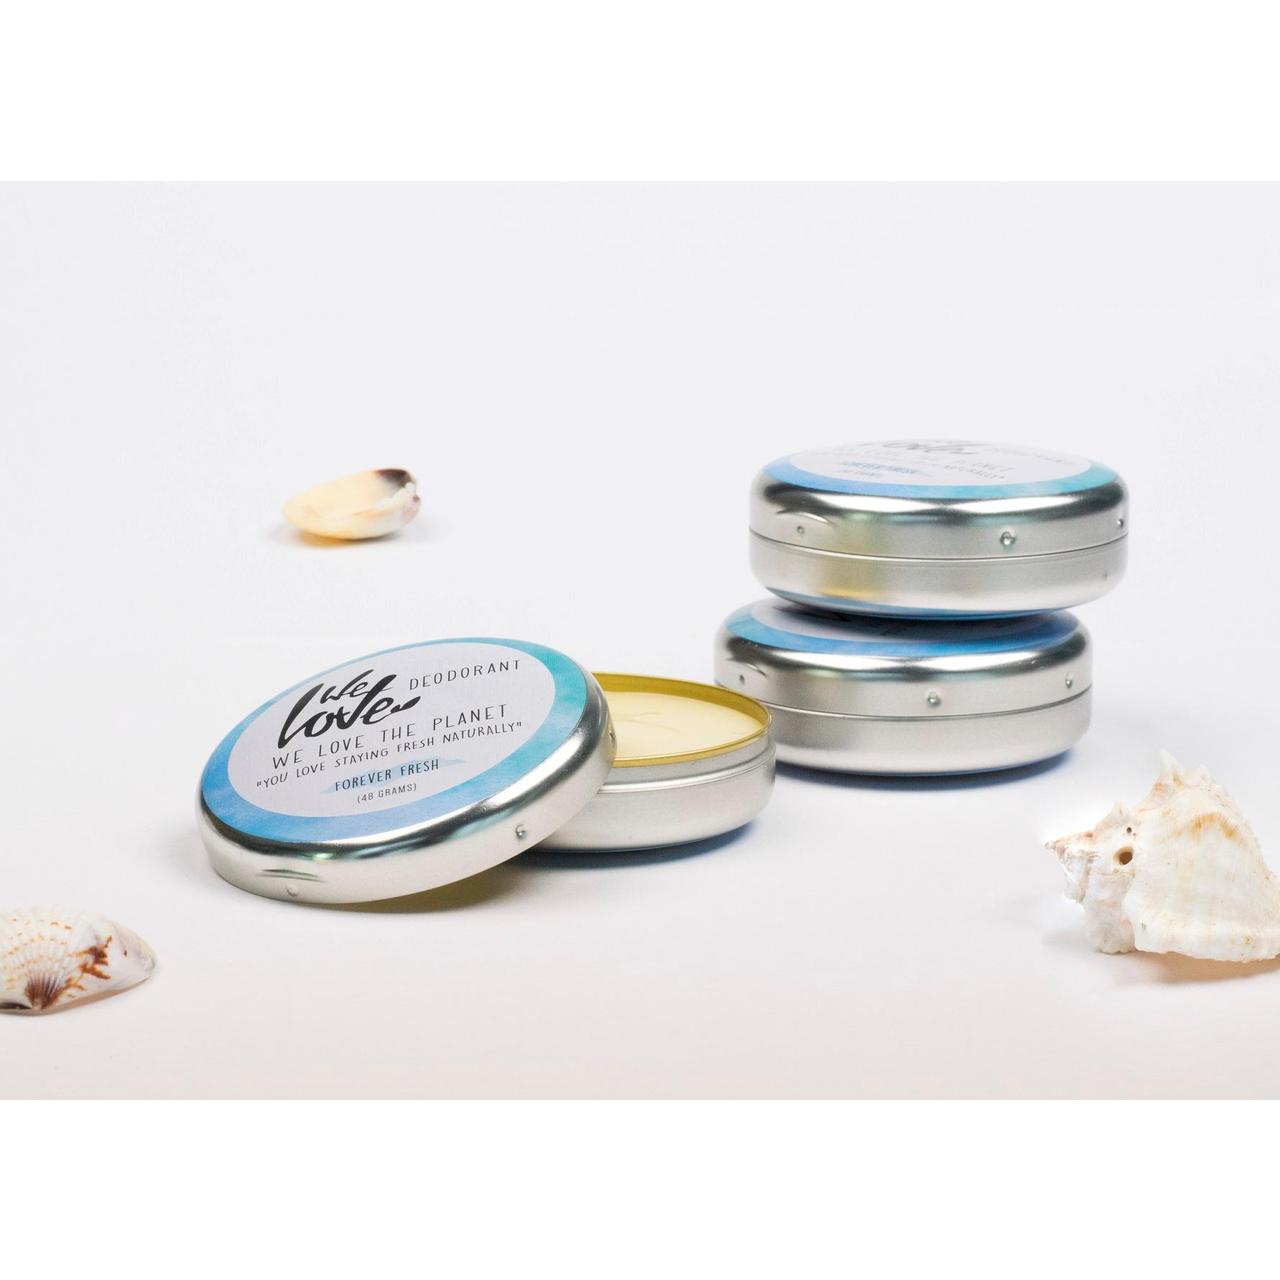 We Love The Planet Natural Deodorant - Forever Fresh 48g (Tin)